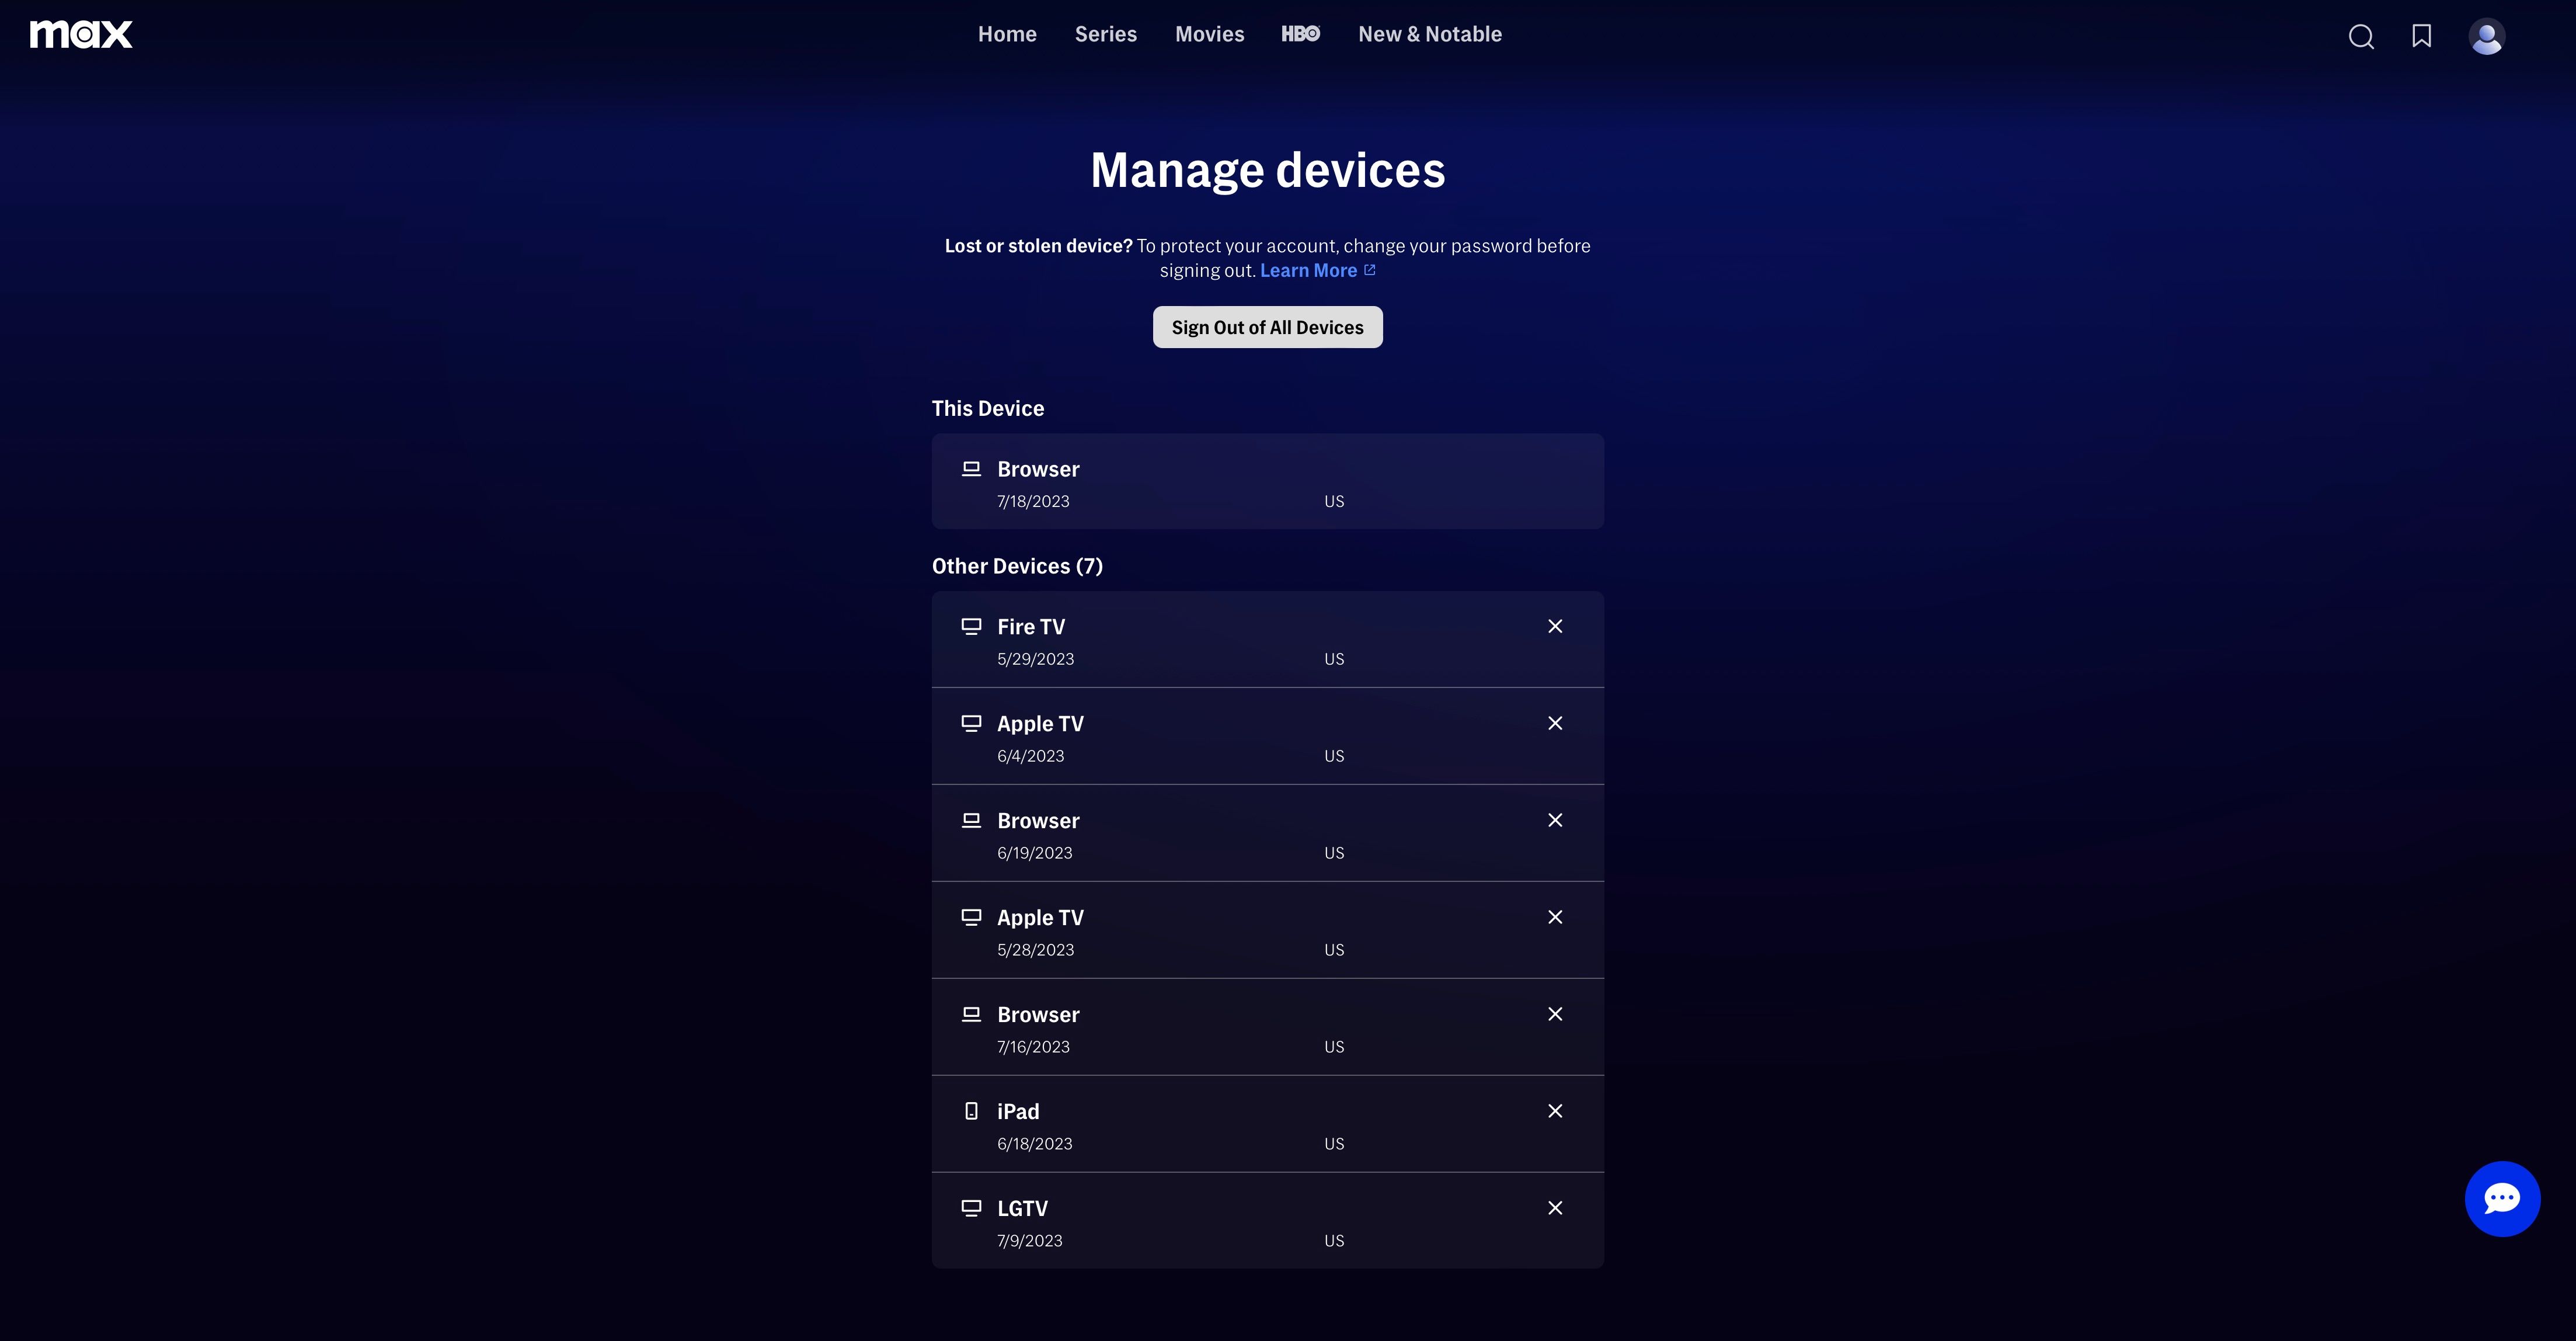 Max Devices Page with Manage Devices Options